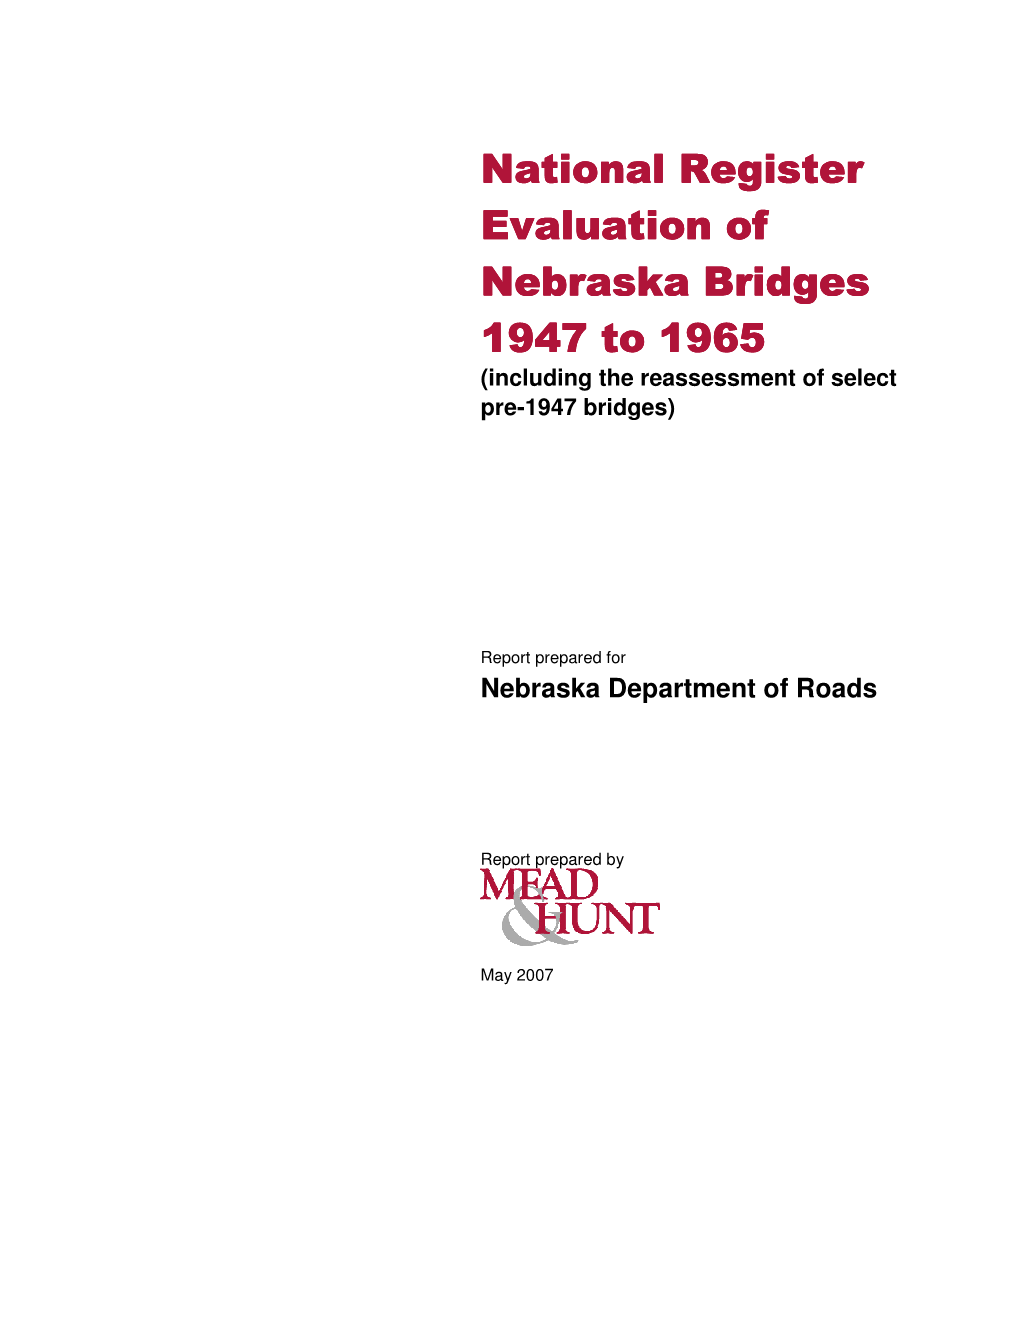 National Register Evaluation of Nebraska Bridges 1947 to 1965 Report Is the Culmination of the Historic Bridge Inventory Update of Nebraska Bridges